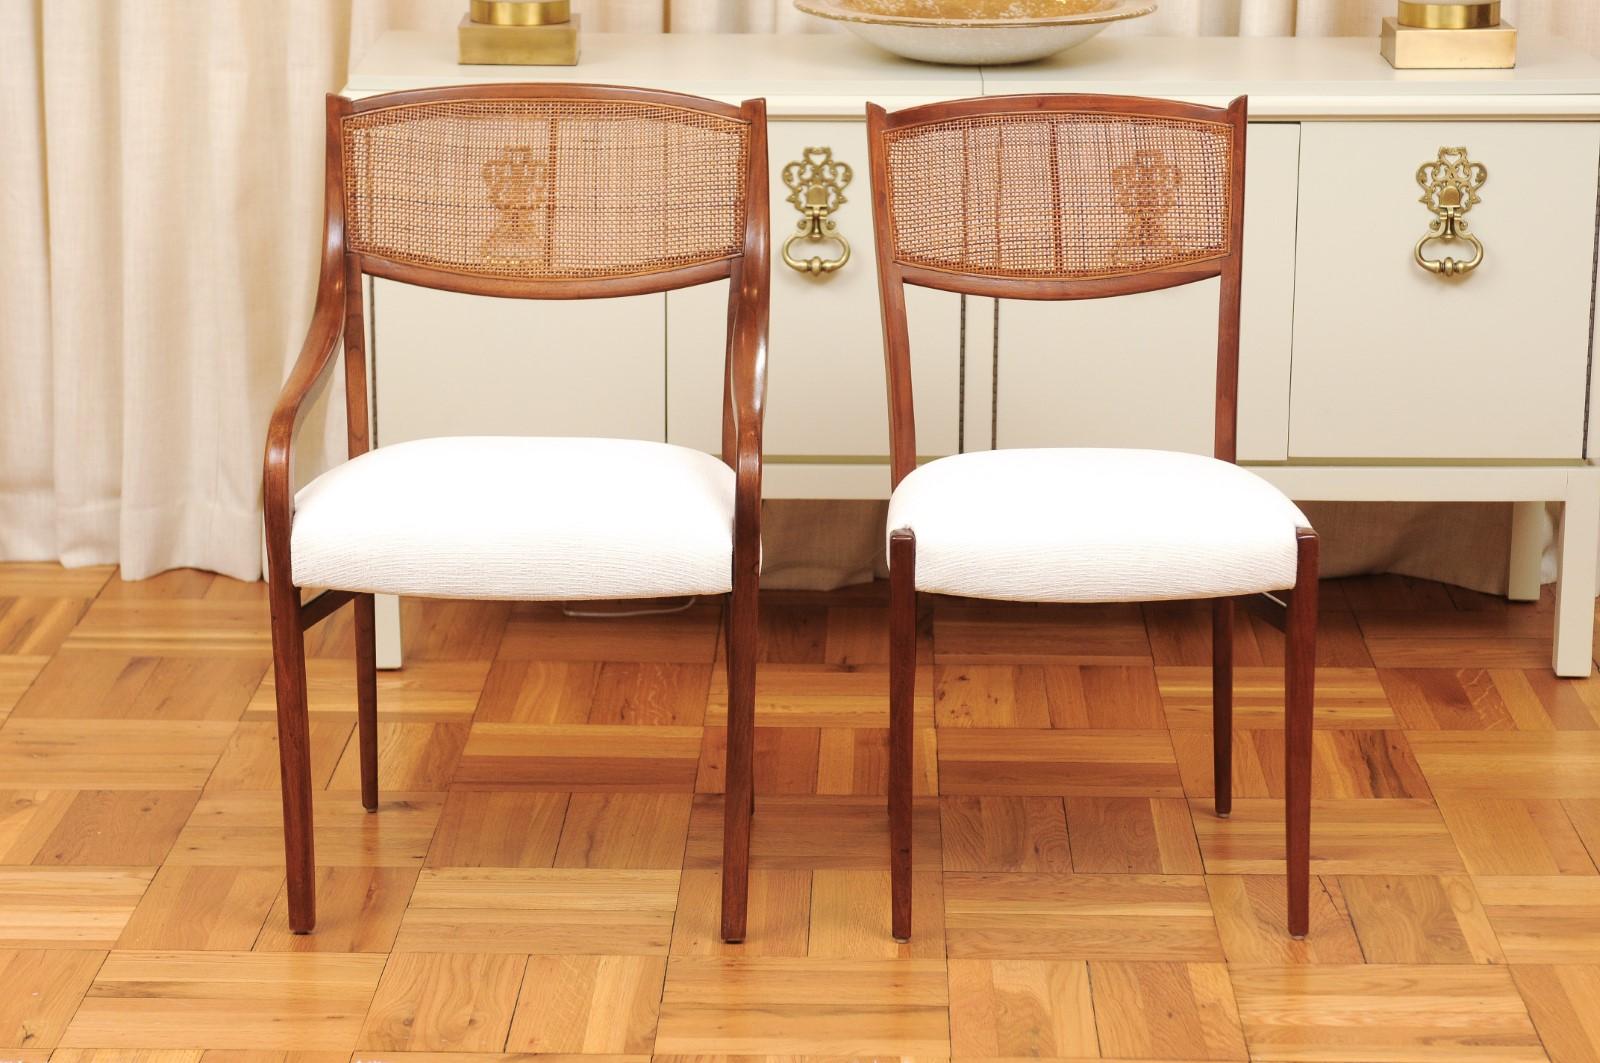 Incredible Set of 8 Walnut Cane Dining Chairs by Barney Flagg, circa 1960 In Excellent Condition For Sale In Atlanta, GA